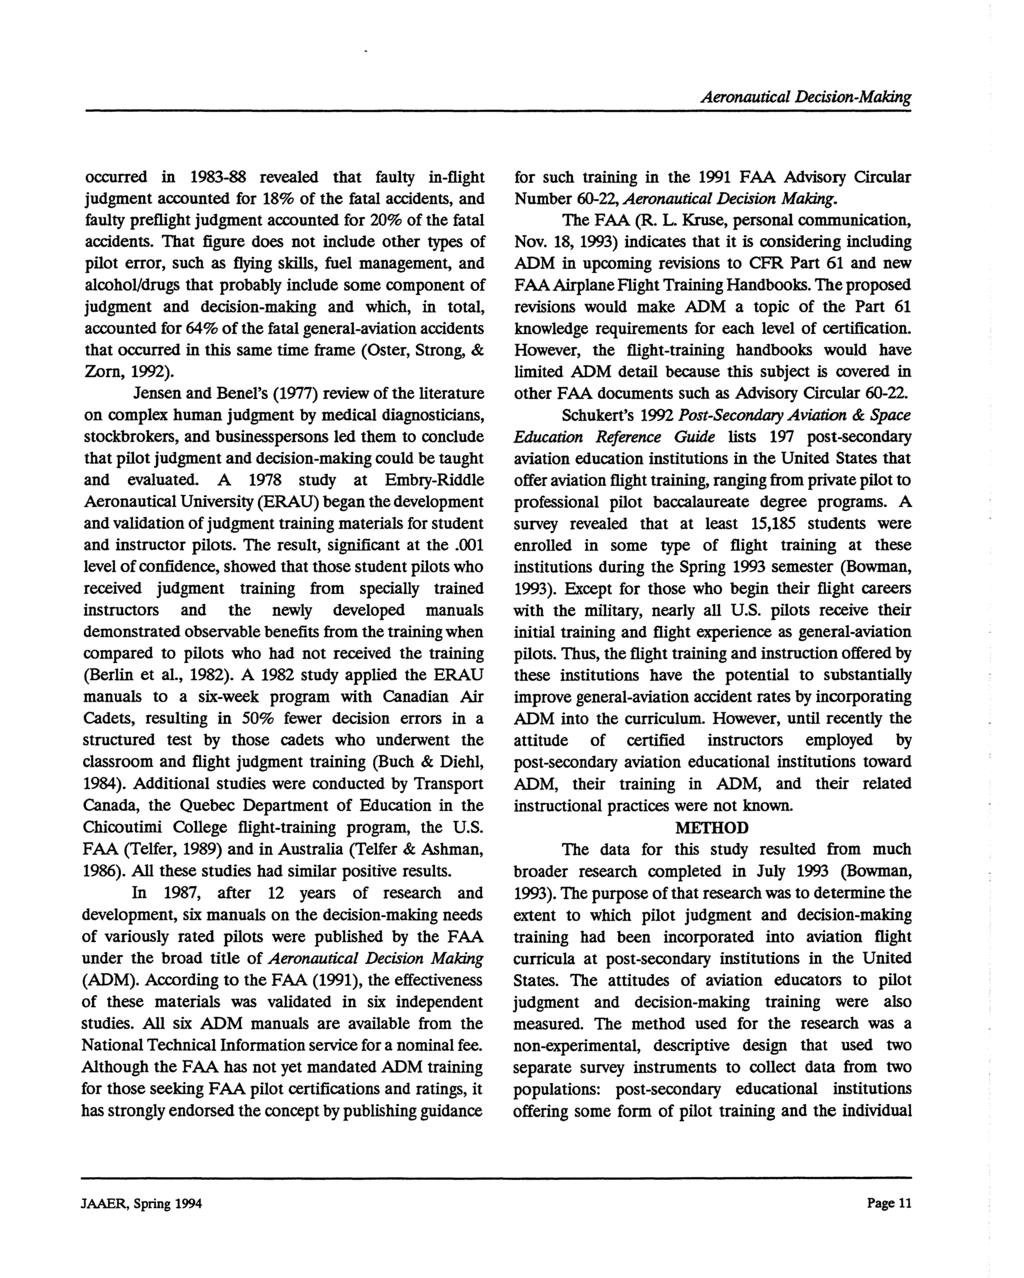 Journal of Aviation/Aerospace Education & Research, Vol. 4, No. 3 [994], Art.